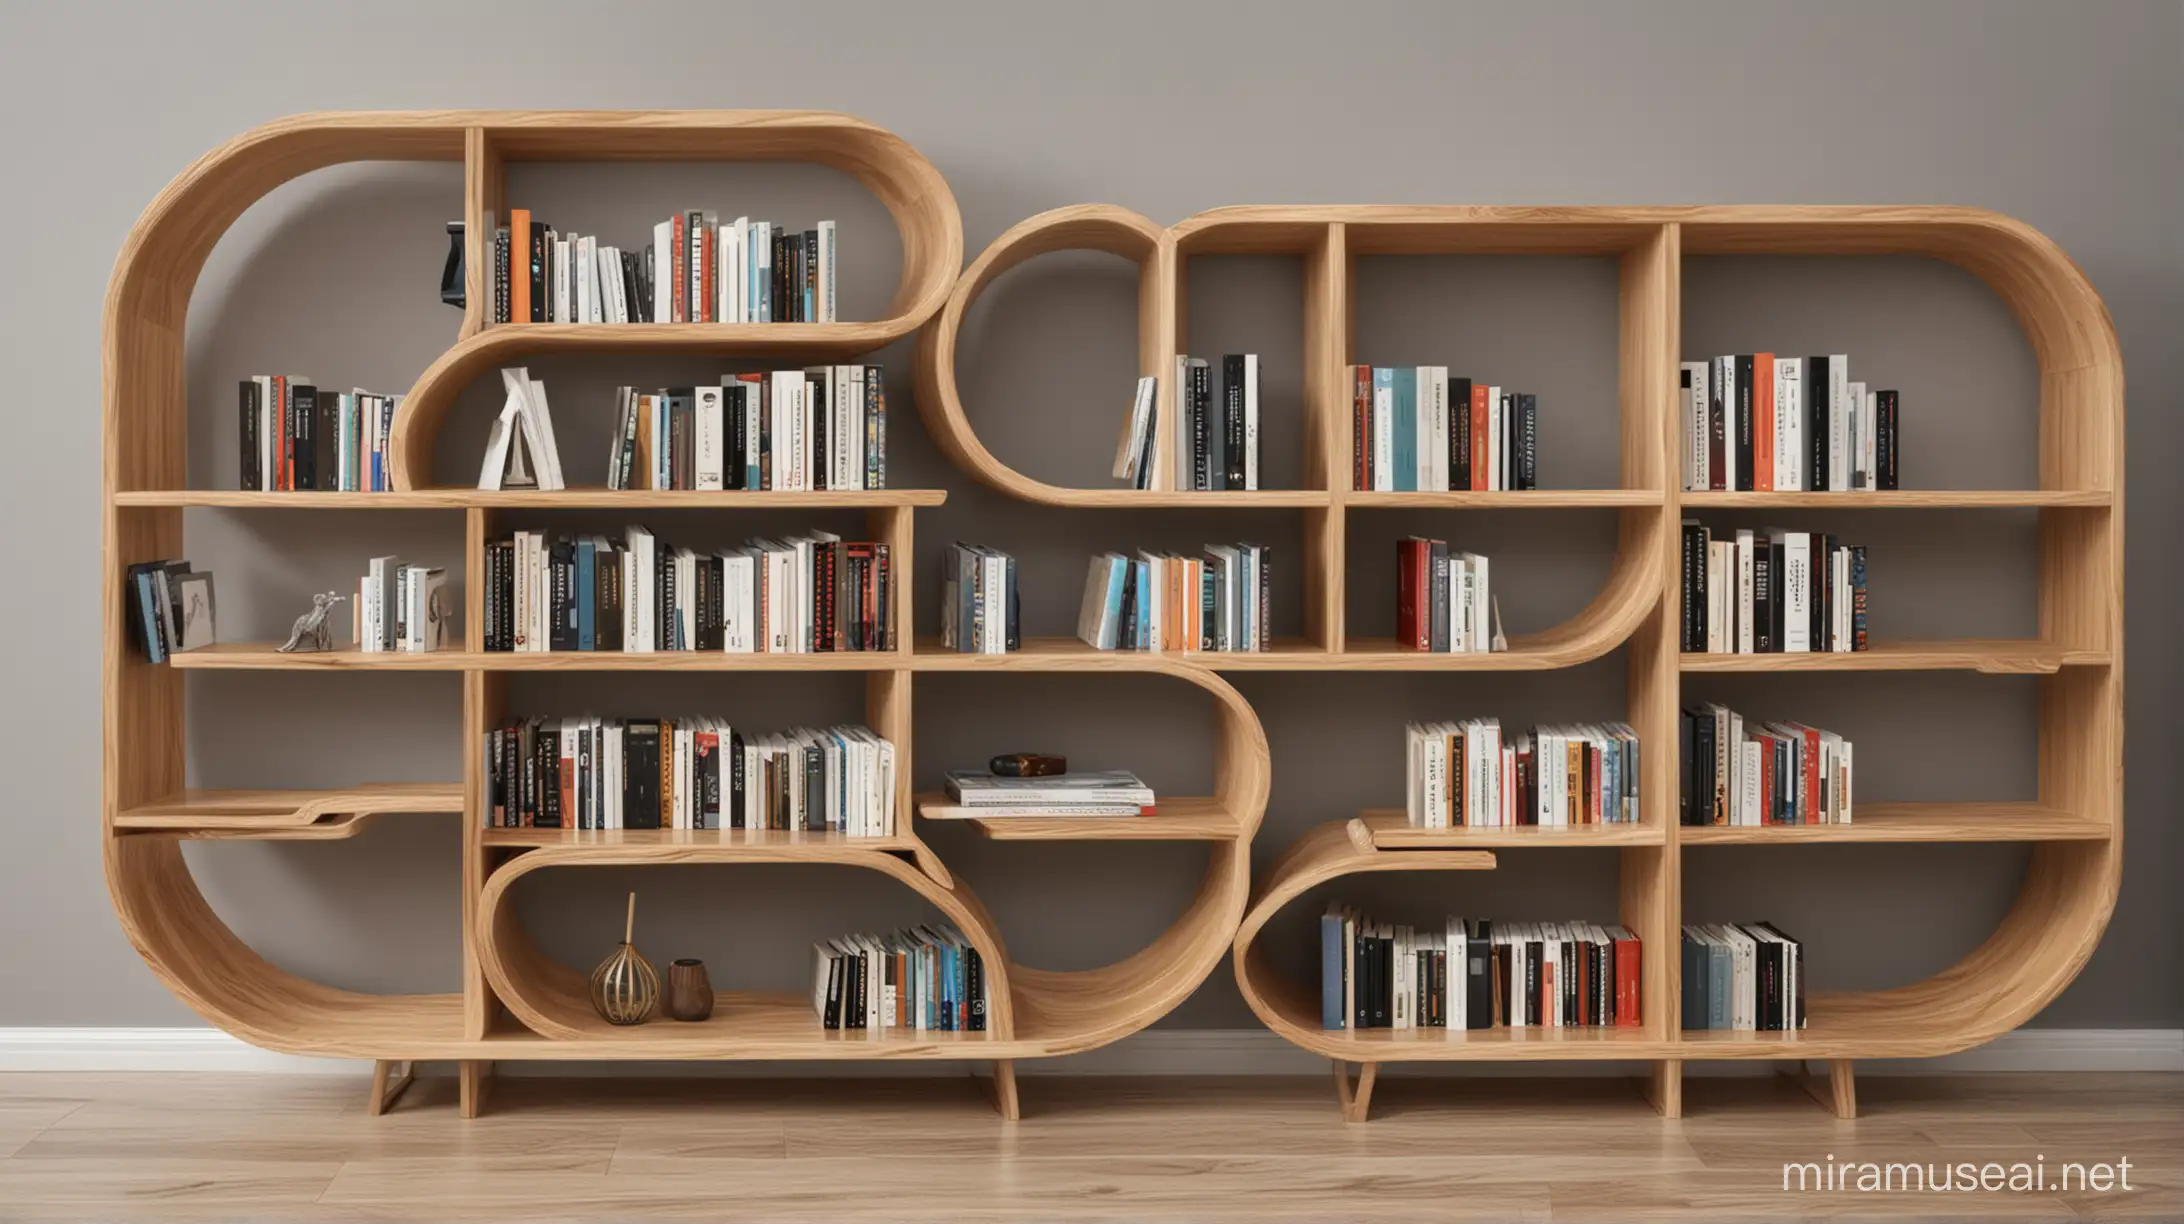 Luxury Modern Wooden Bookshelf with Varied Board Dimensions and Bionic Round Corners